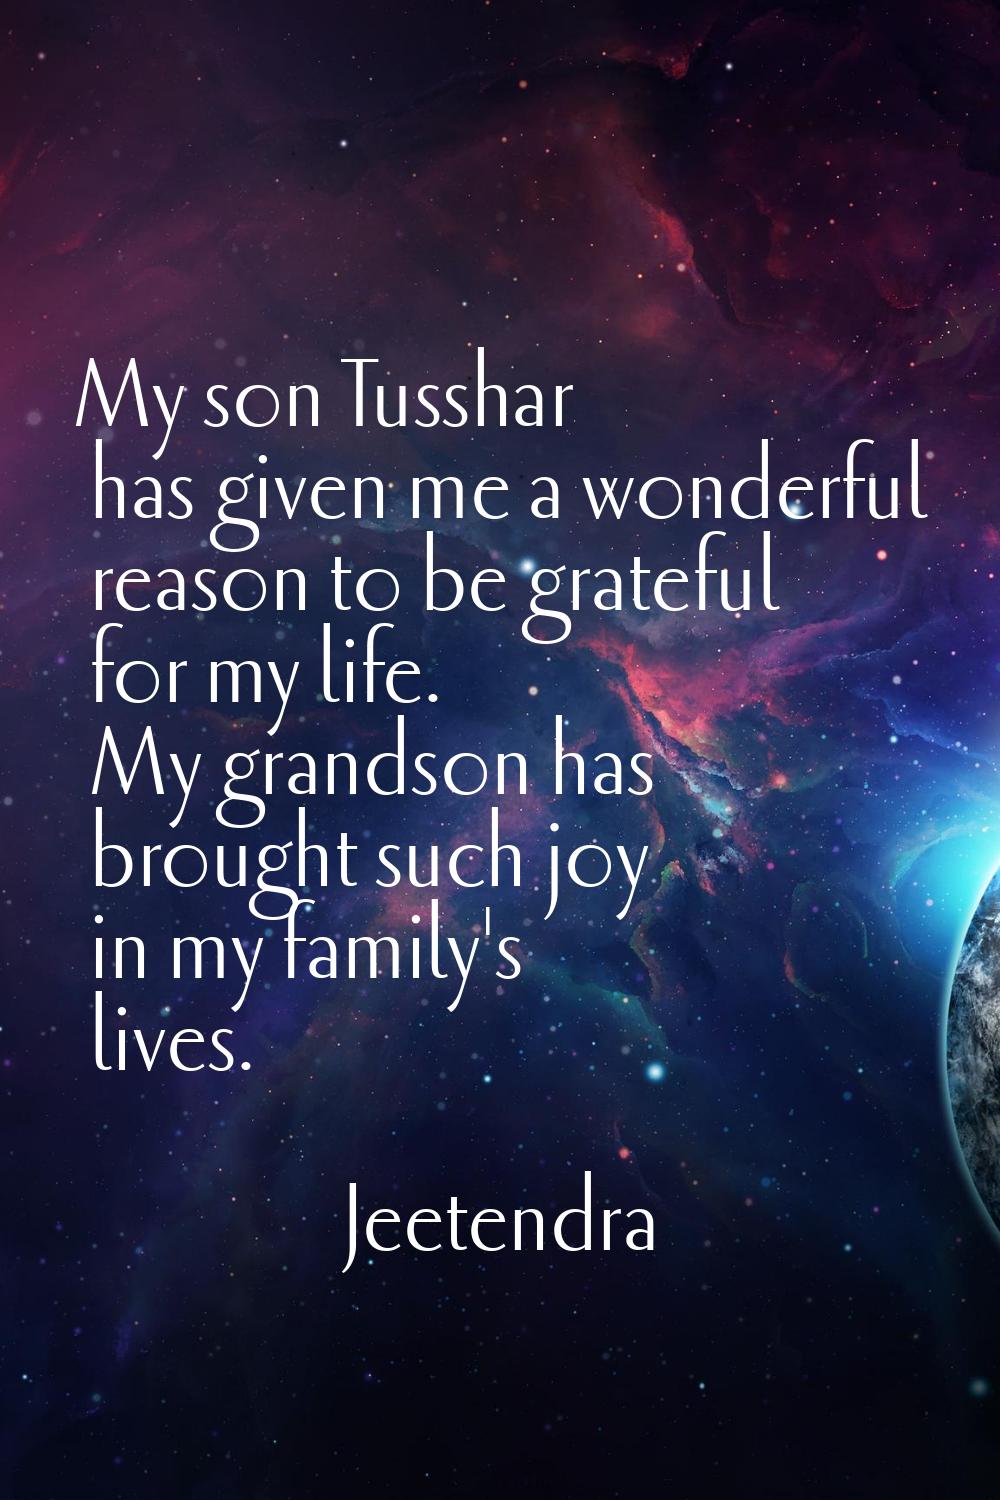 My son Tusshar has given me a wonderful reason to be grateful for my life. My grandson has brought 